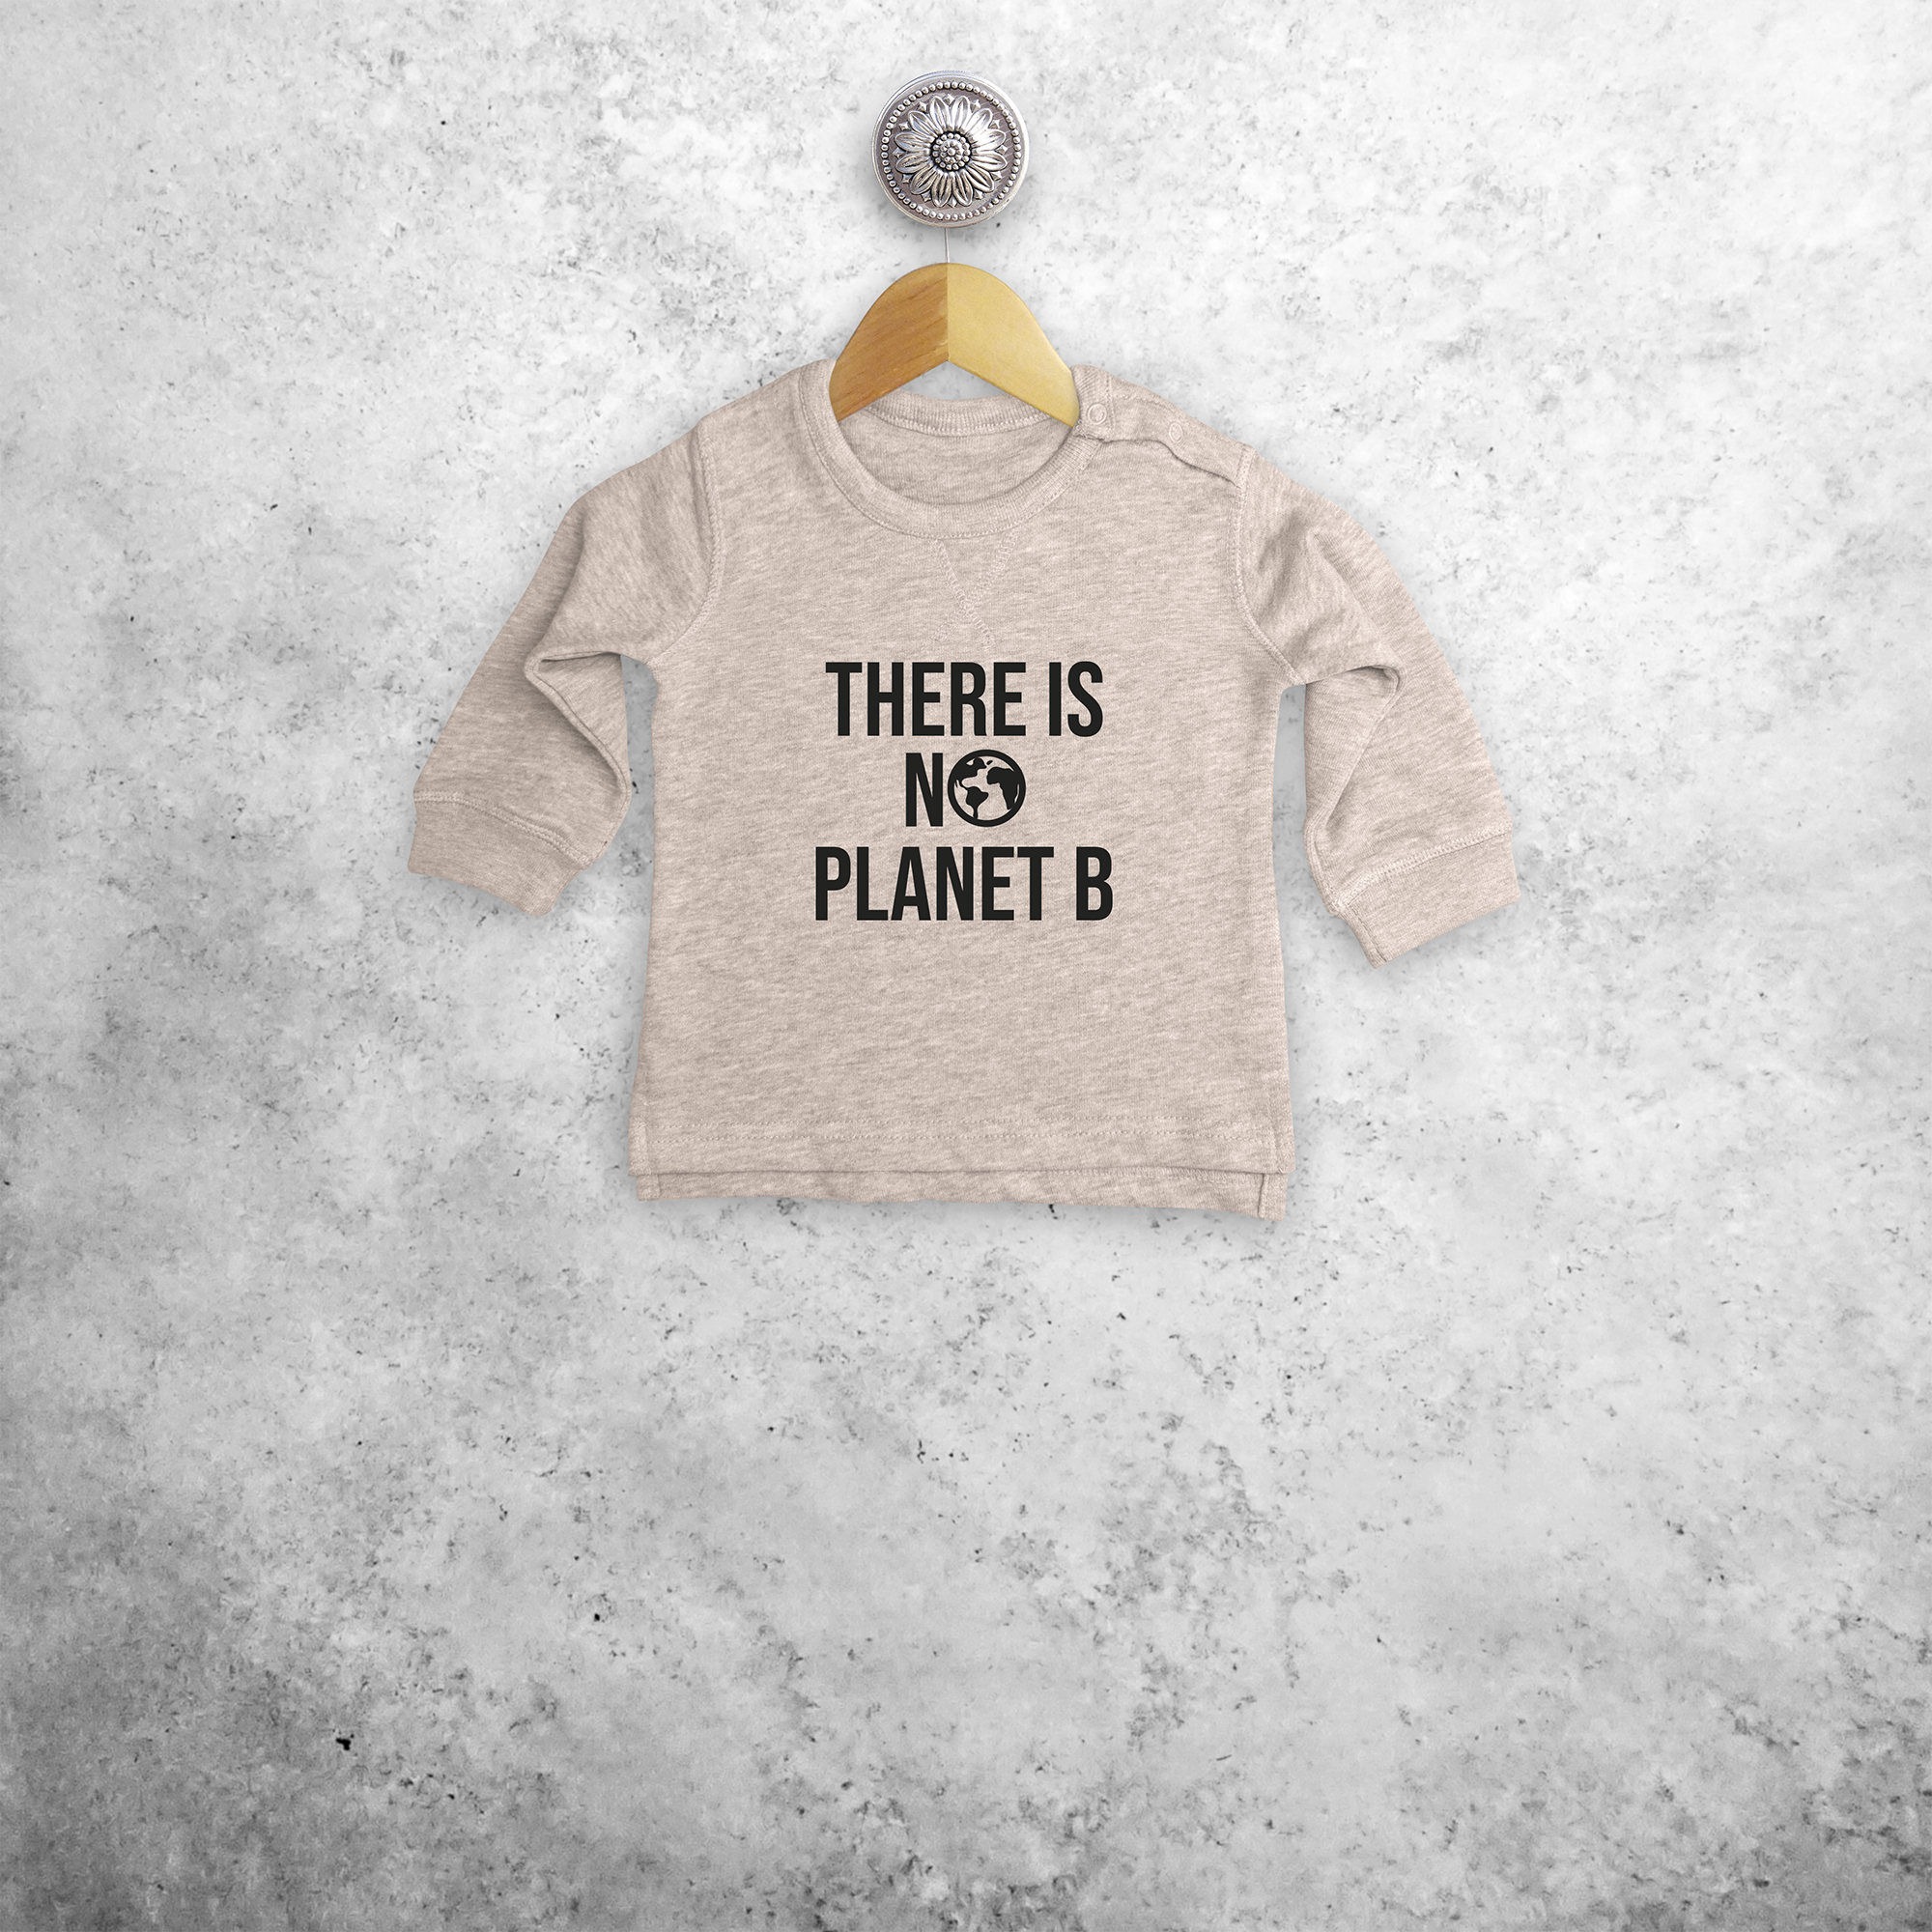 'There is no planet B' baby sweater